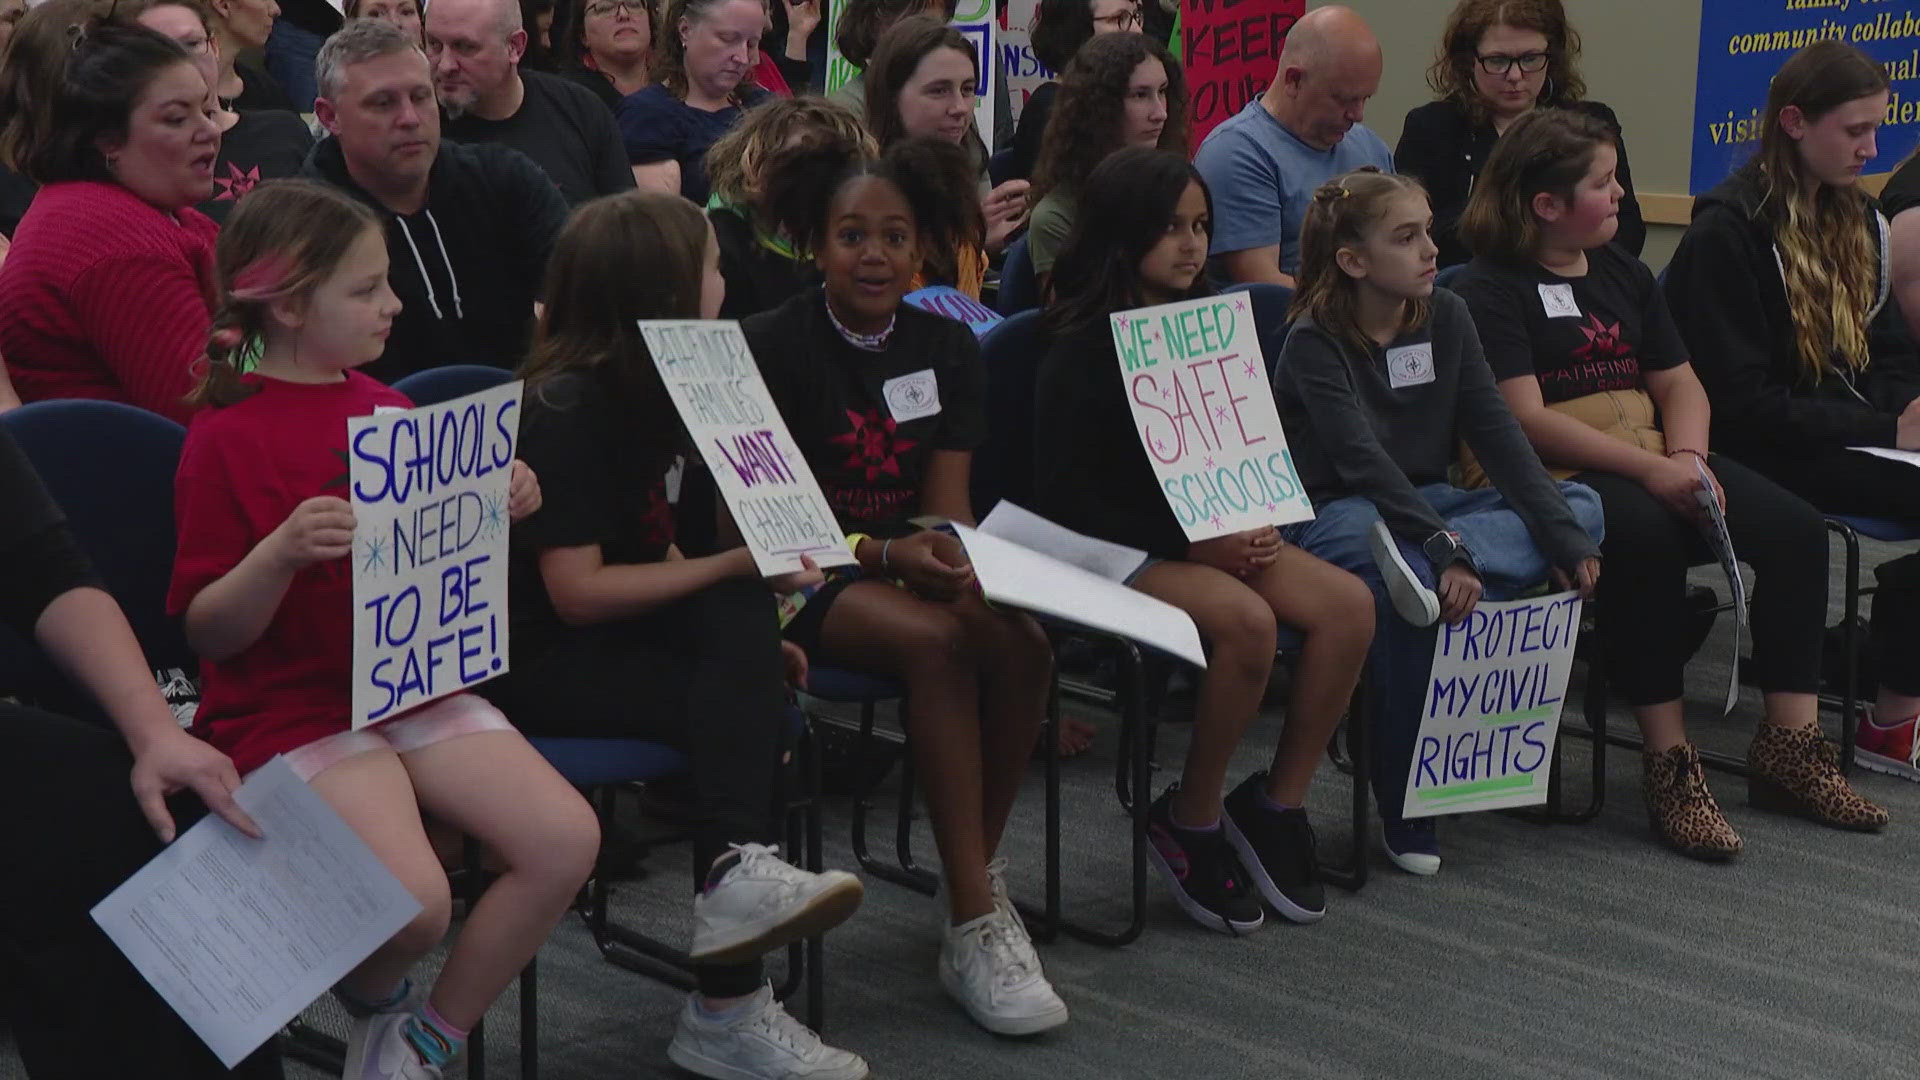 A group of parents and students spoke at the Seattle Public Schools Board Meeting Wednesday night.